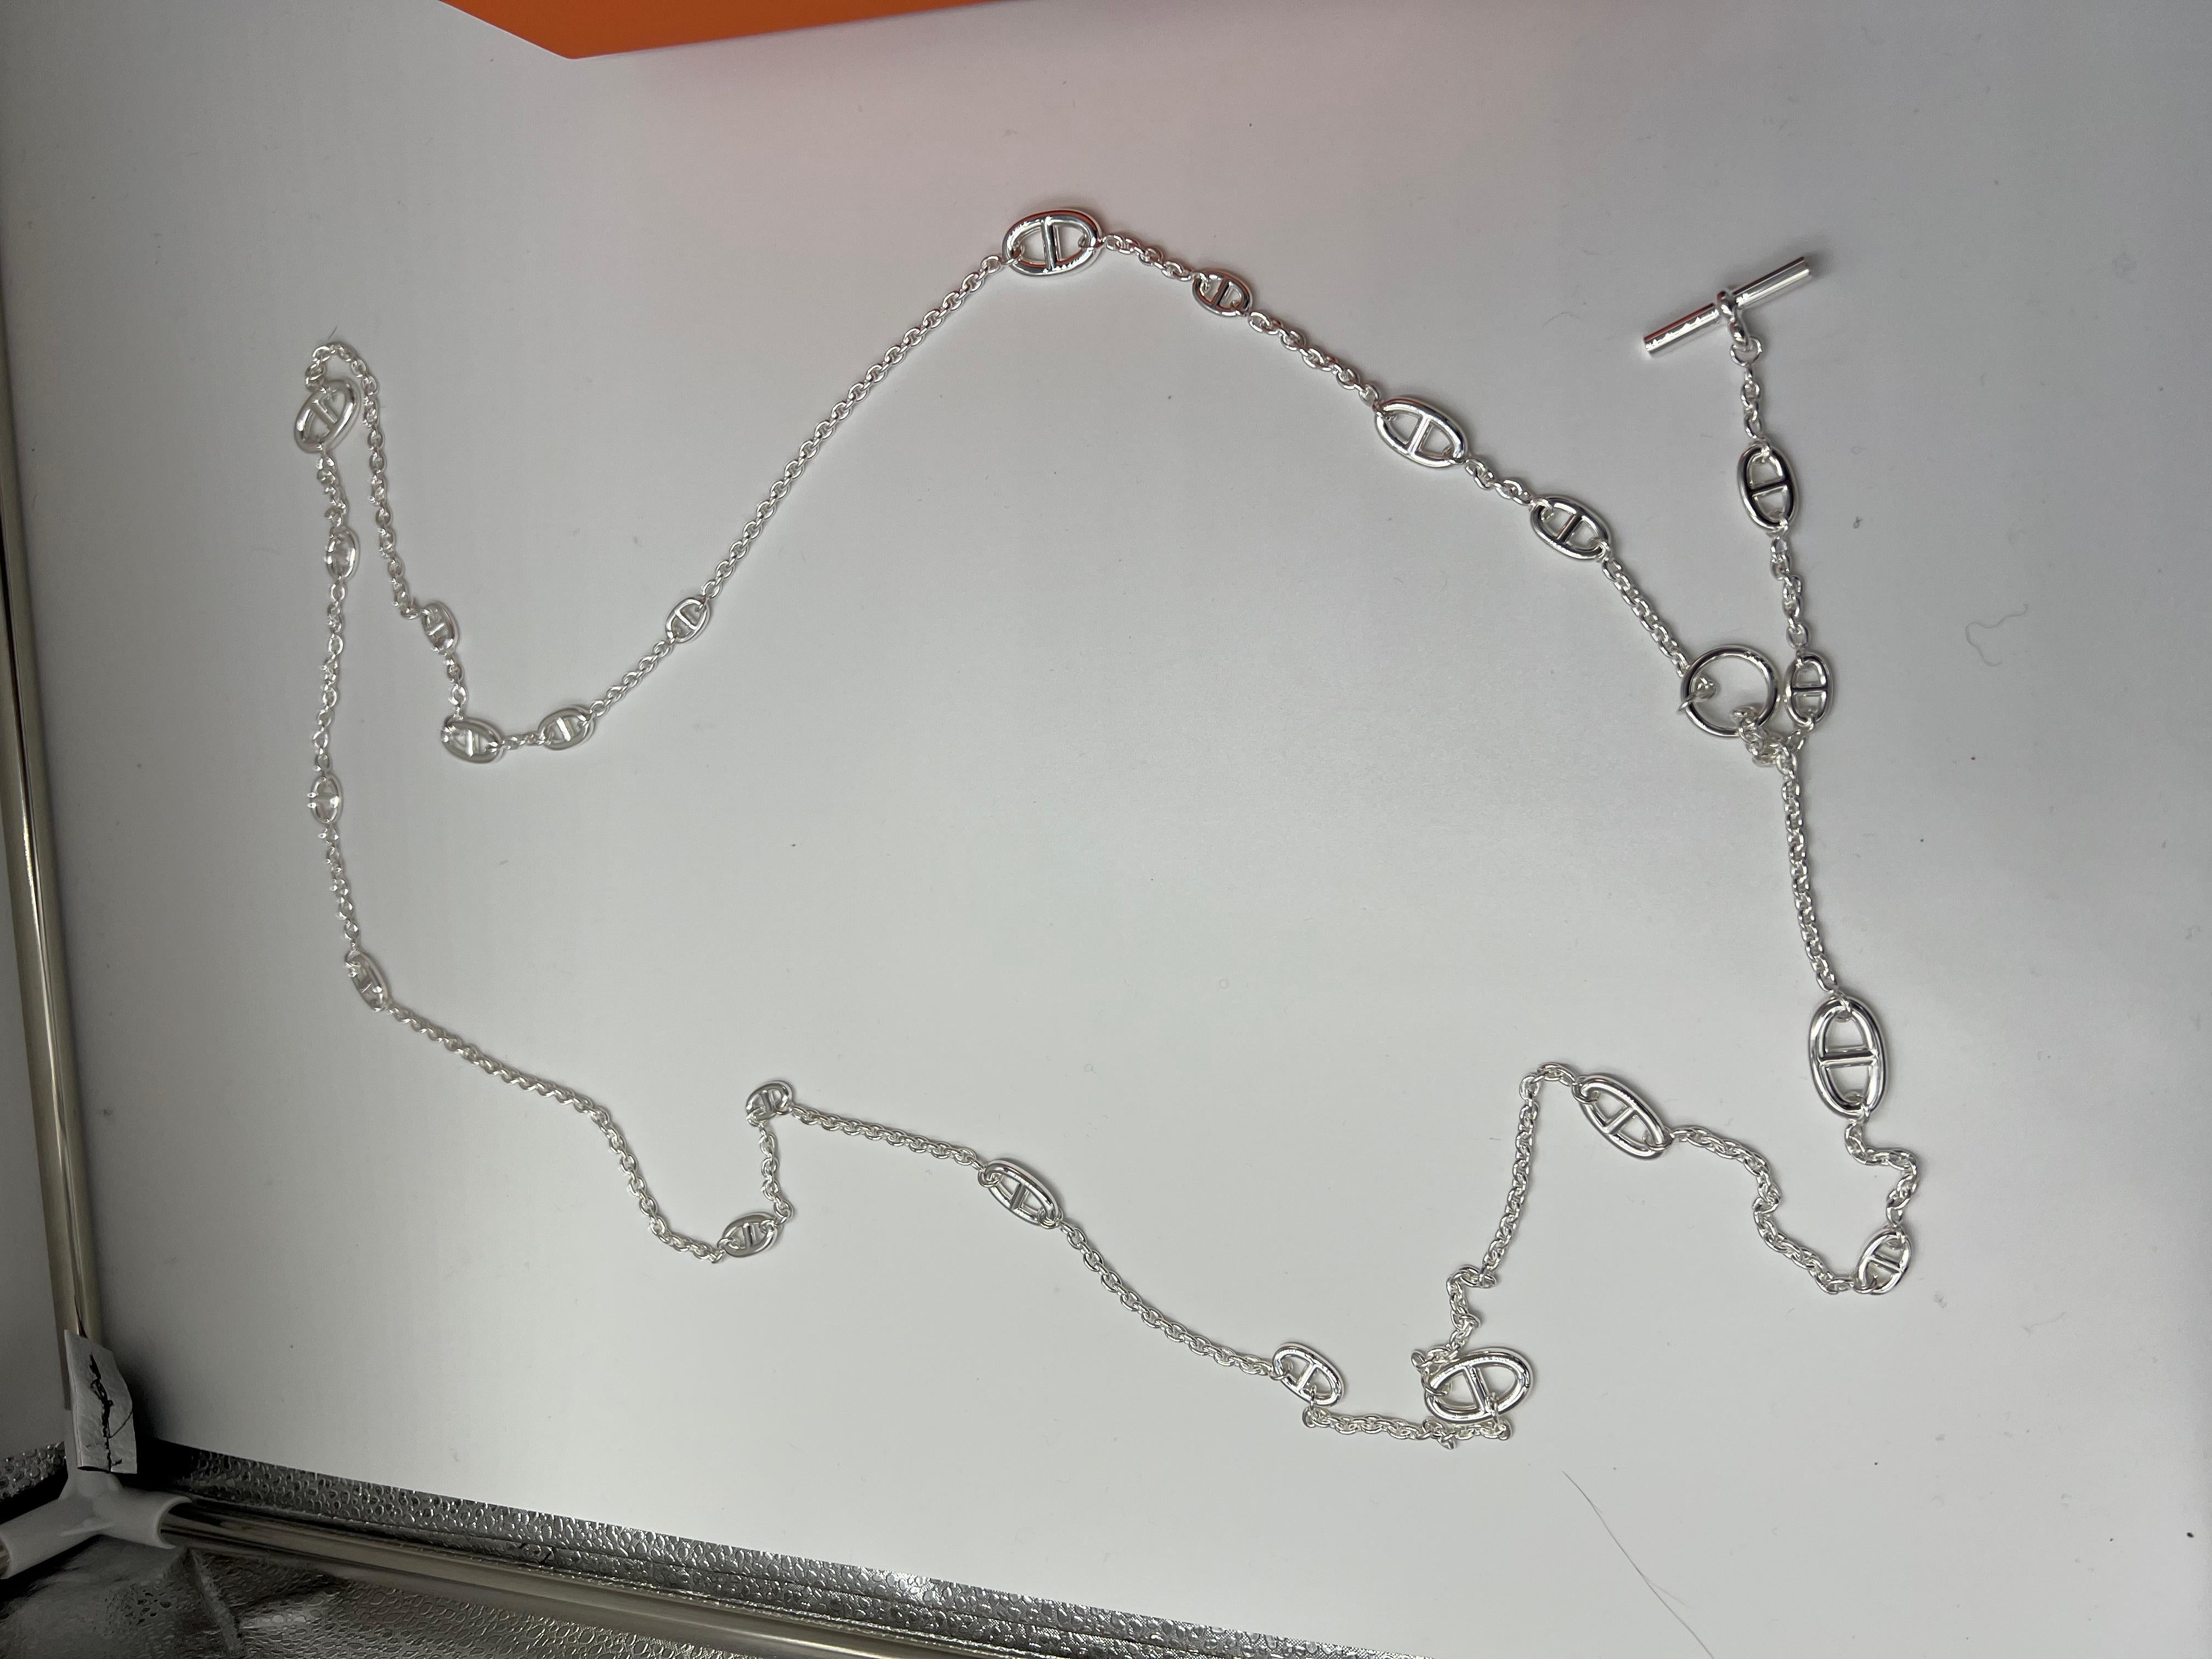 Hermes Farandole long necklace 160 cm

Long necklace in sterling silver

Made in France/Italy
Silver 925/1000
Total length: 160 cm
Comes brand new with box and certificate
